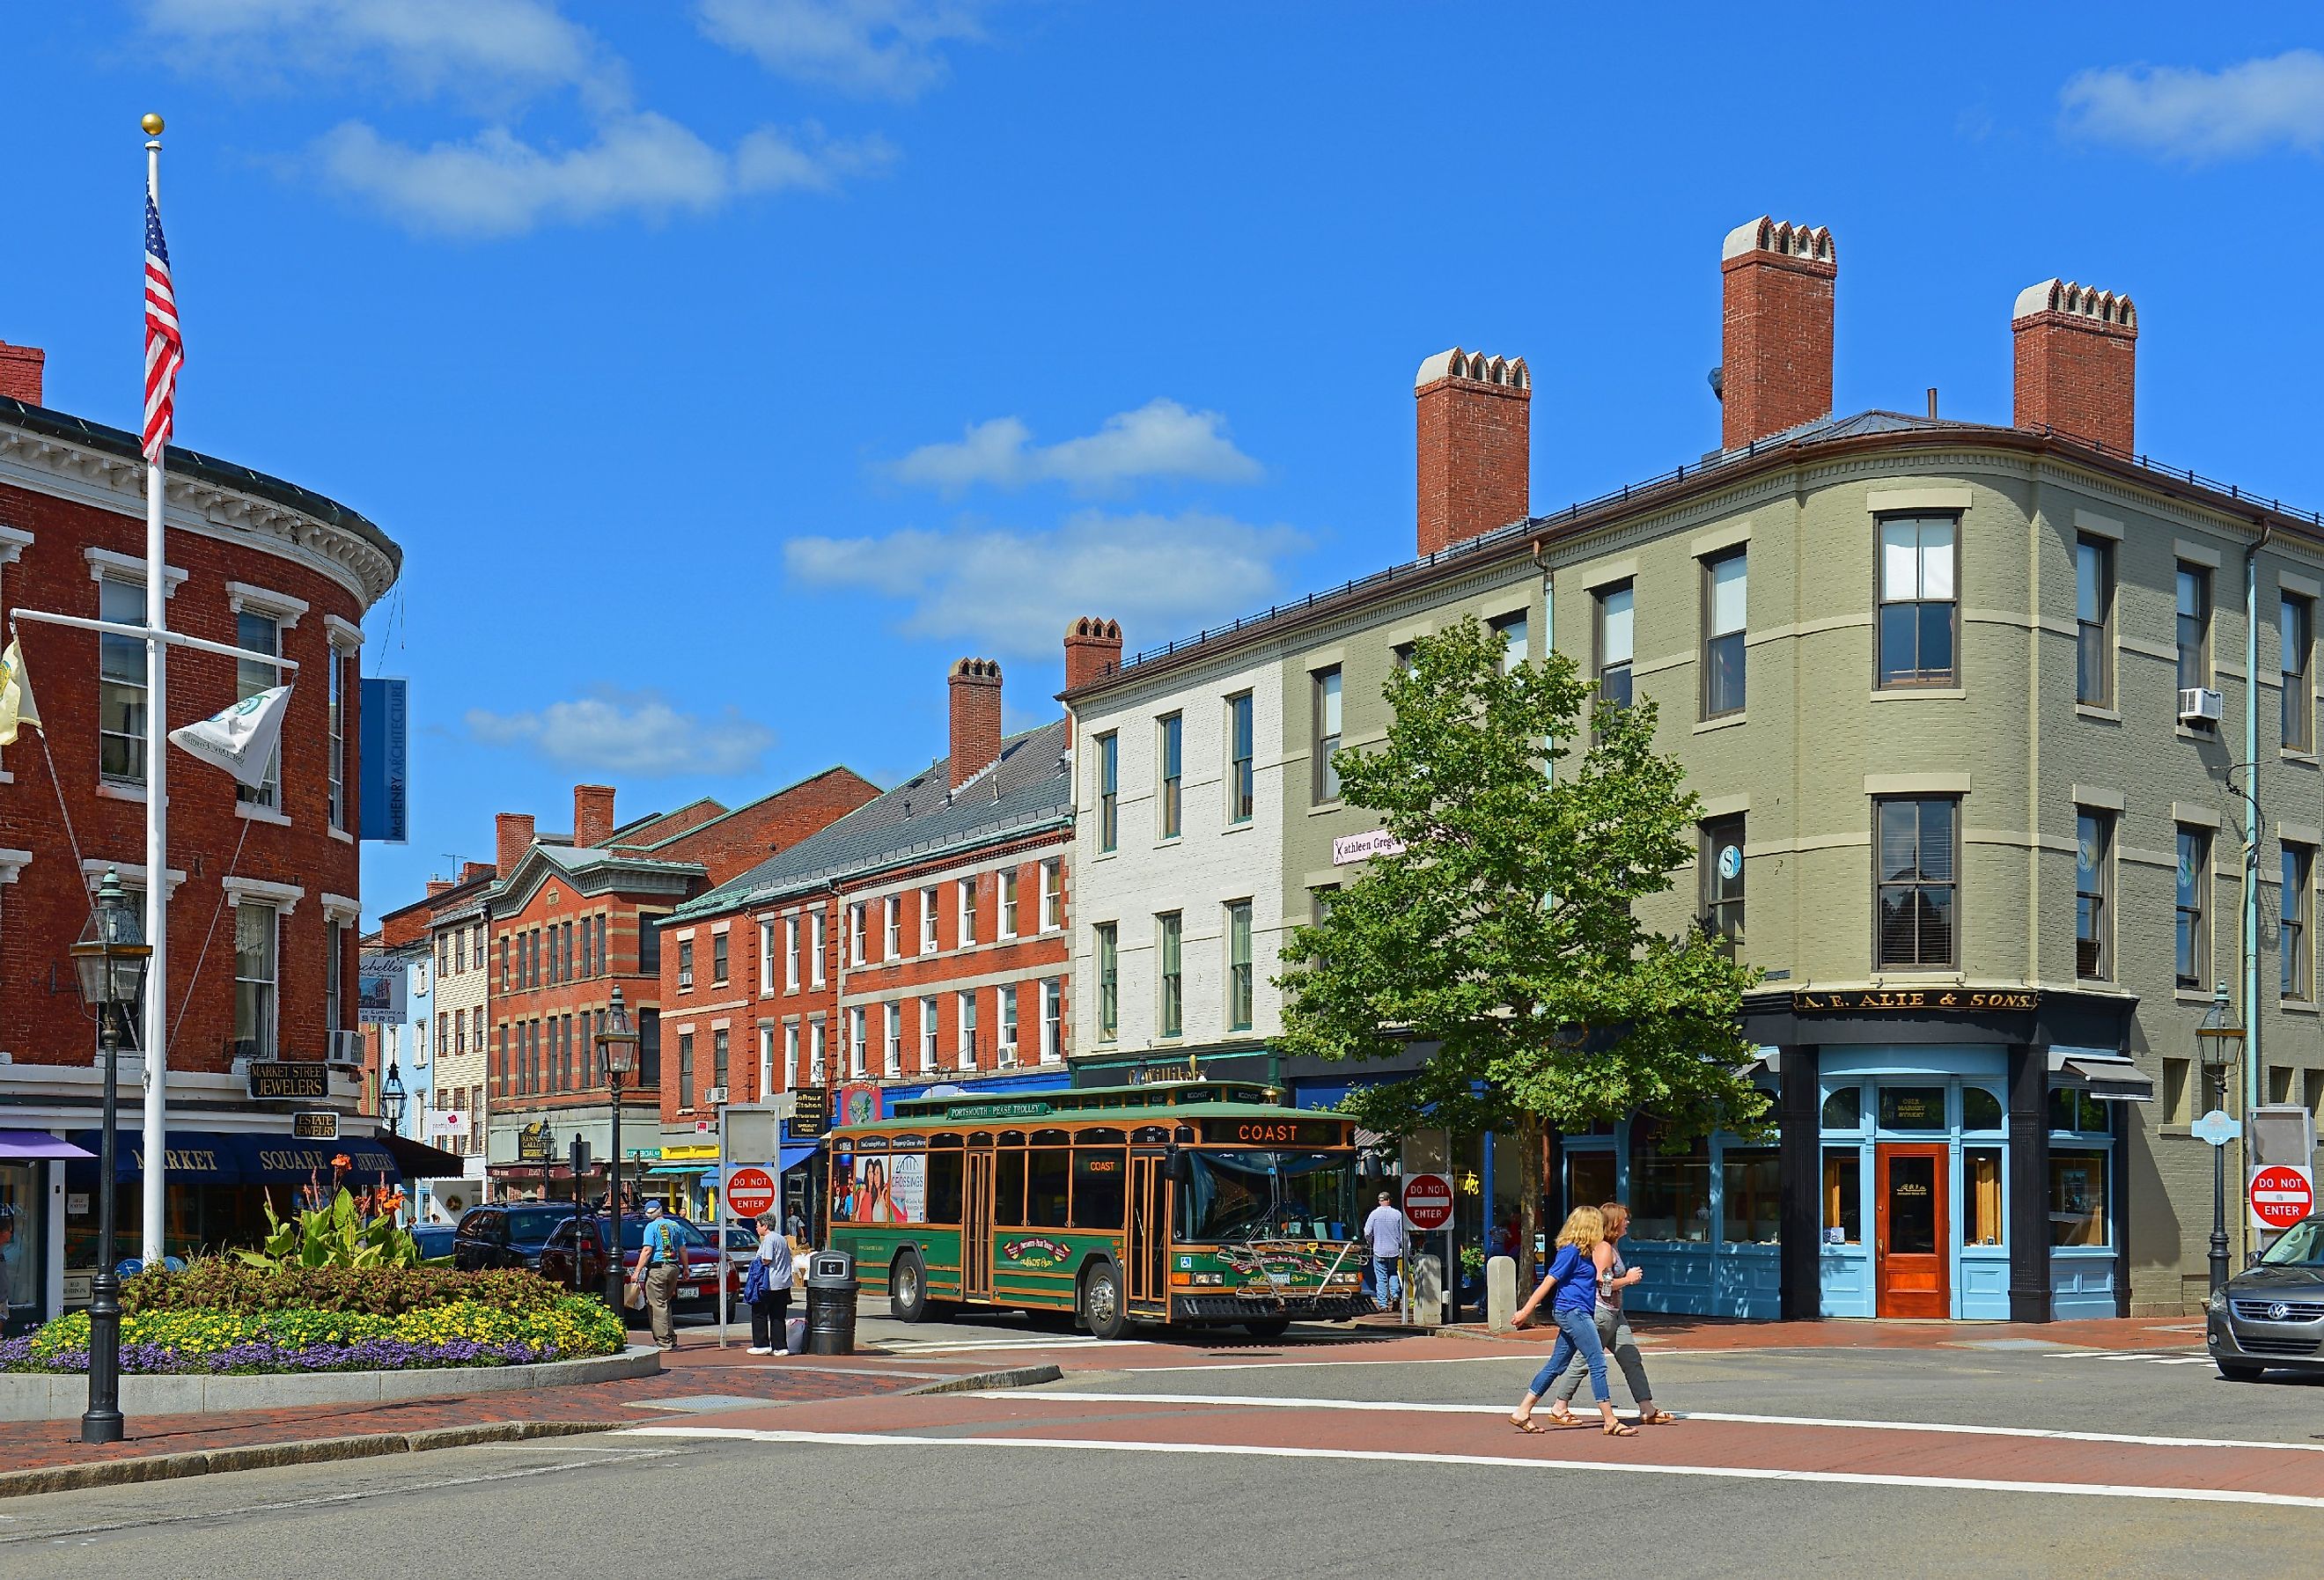 Historic buildings on Market Street at Market Square in downtown Portsmouth, New Hampshire. Image credit Wangkun Jia via Shutterstock